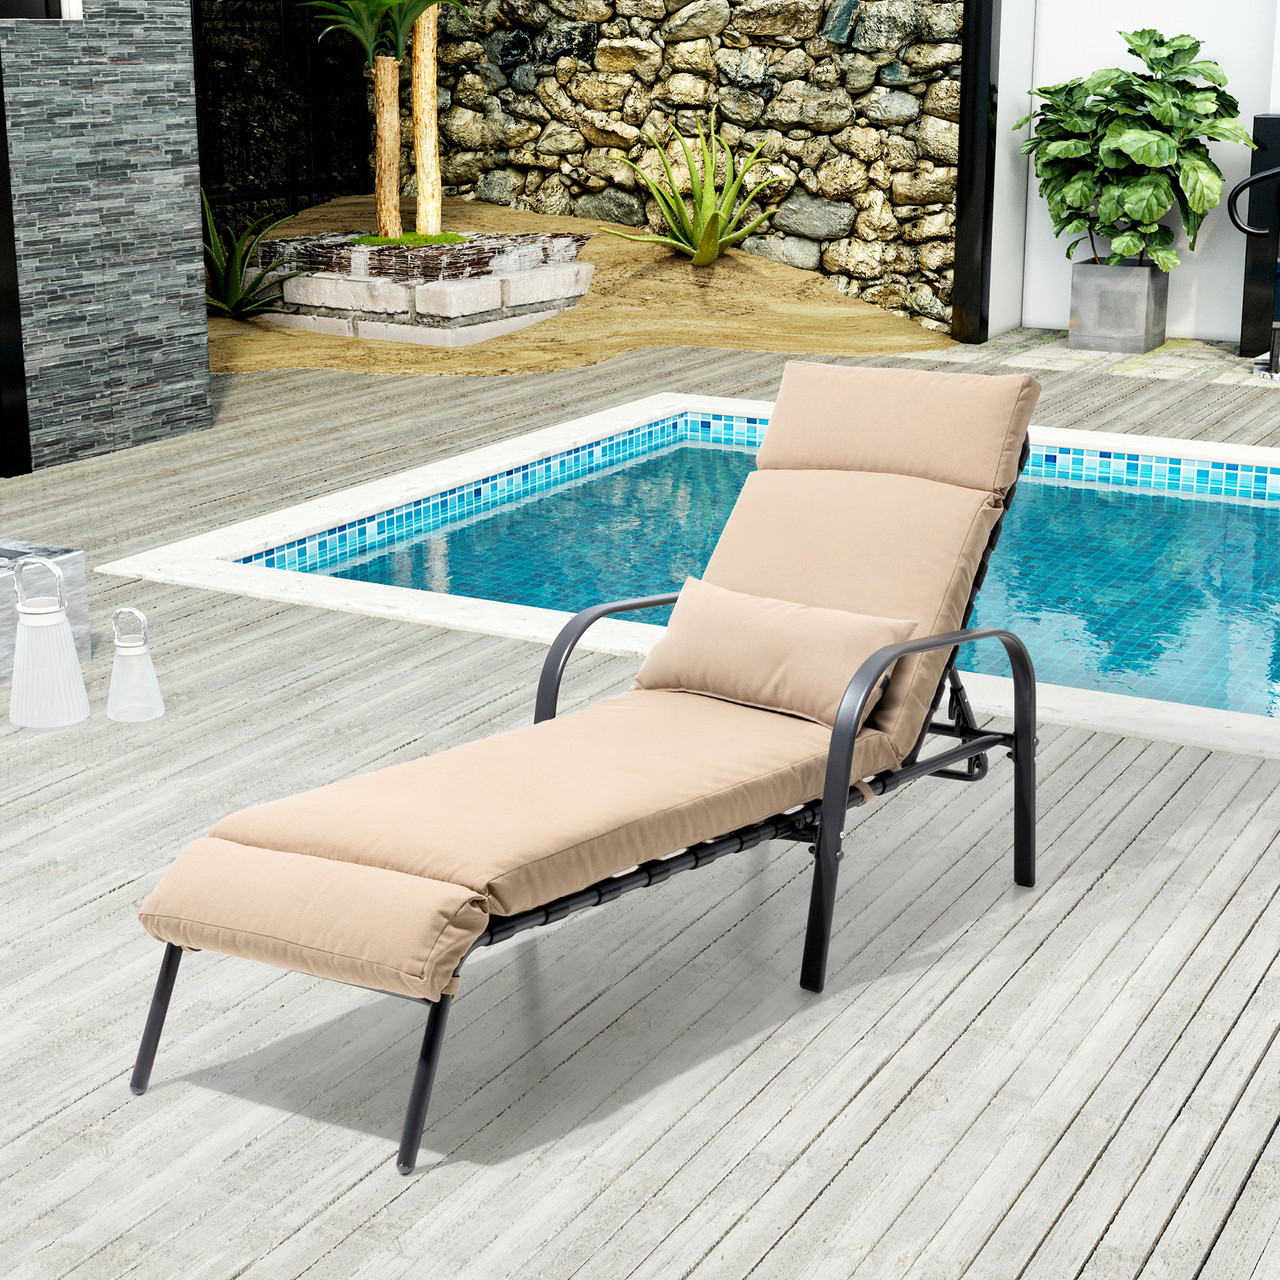 Dropship Patio Recliner Chair With Cushions,Outdoor Adjustable